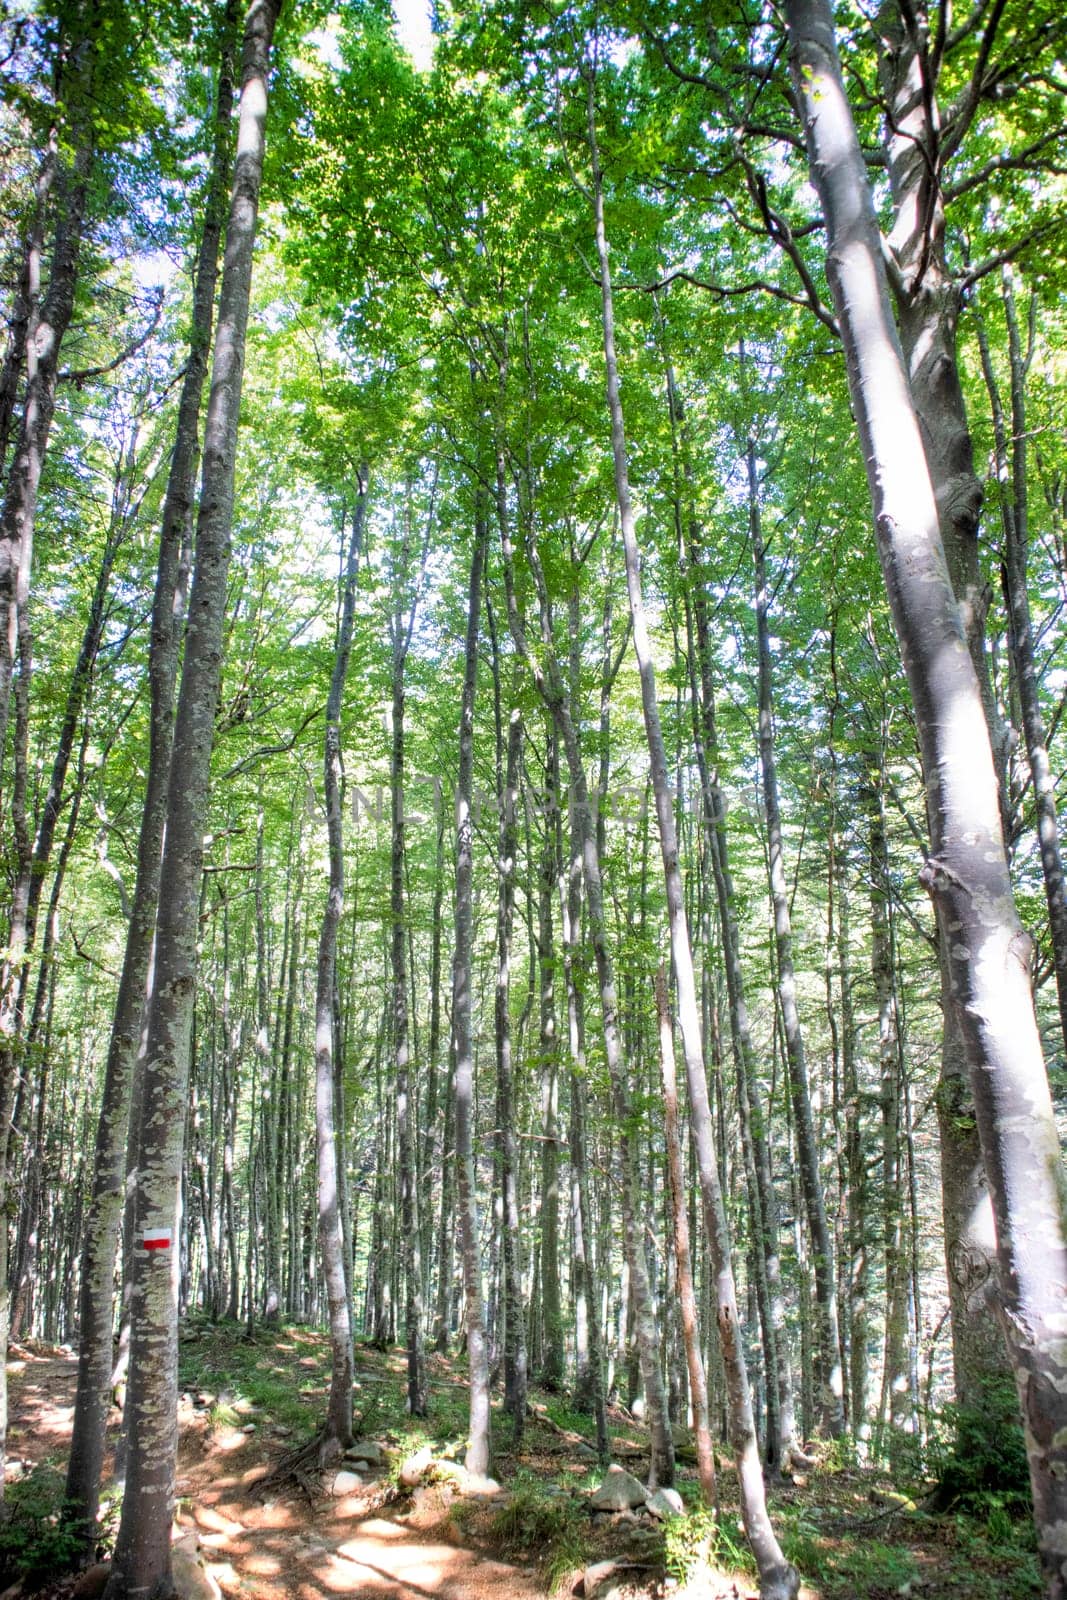 Photographic documentation of the view of a large forest in the spring season 